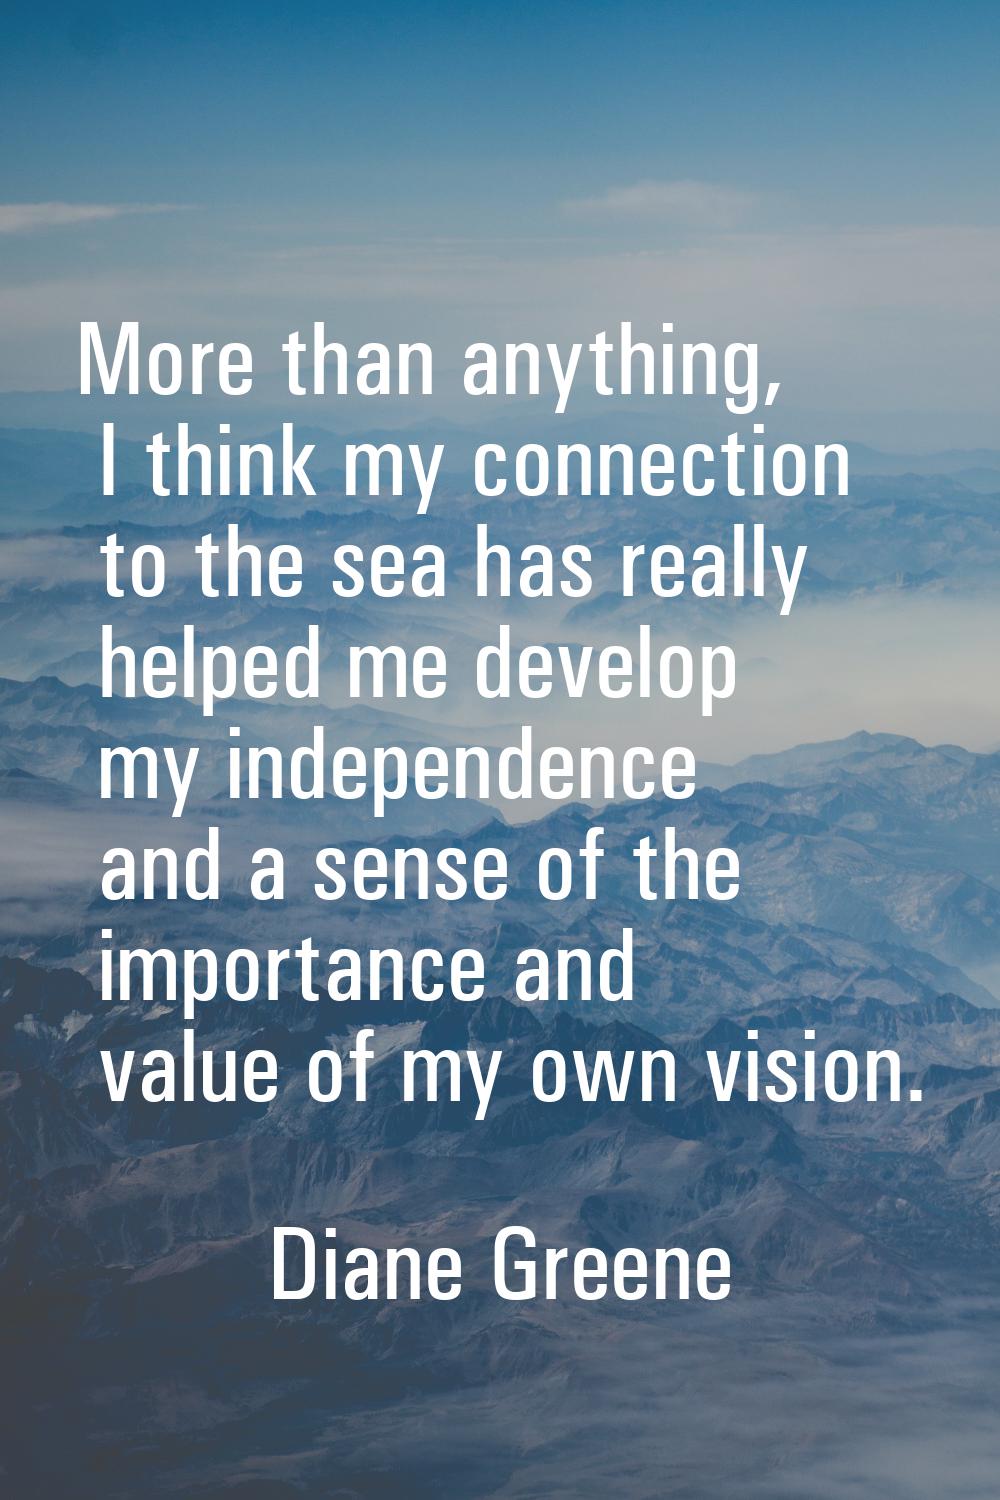 More than anything, I think my connection to the sea has really helped me develop my independence a